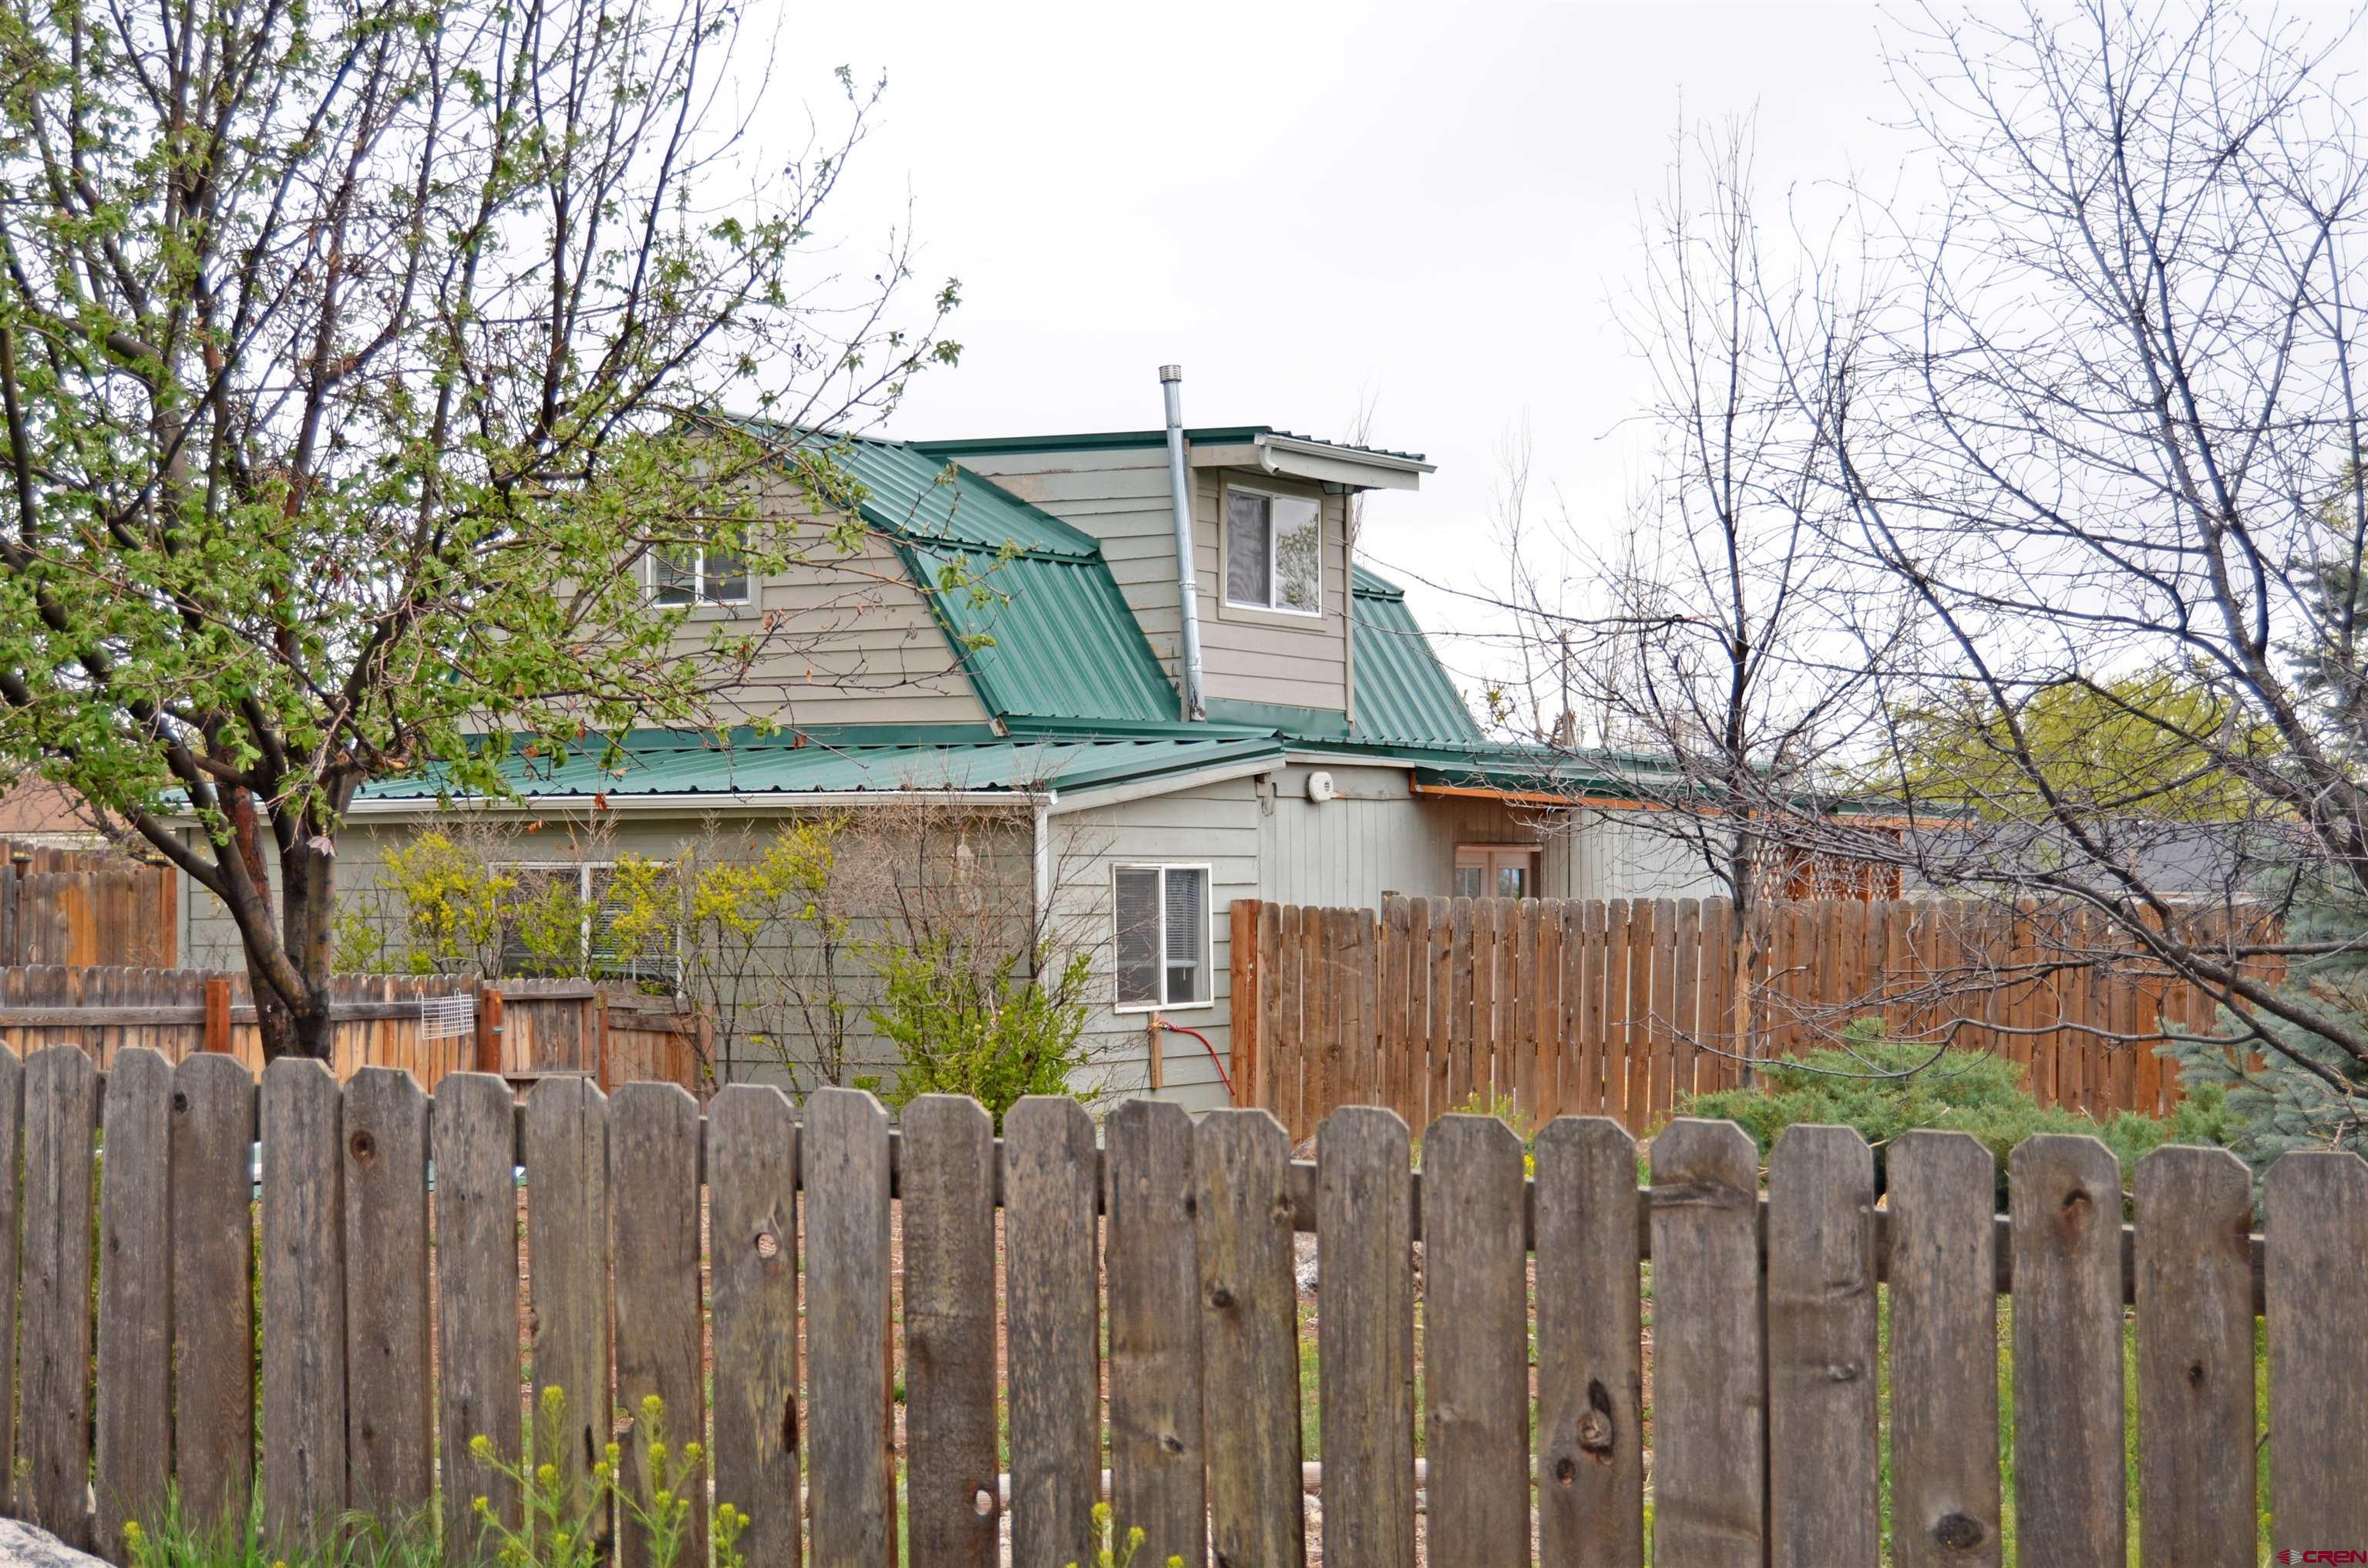 a view of a house with wooden fence